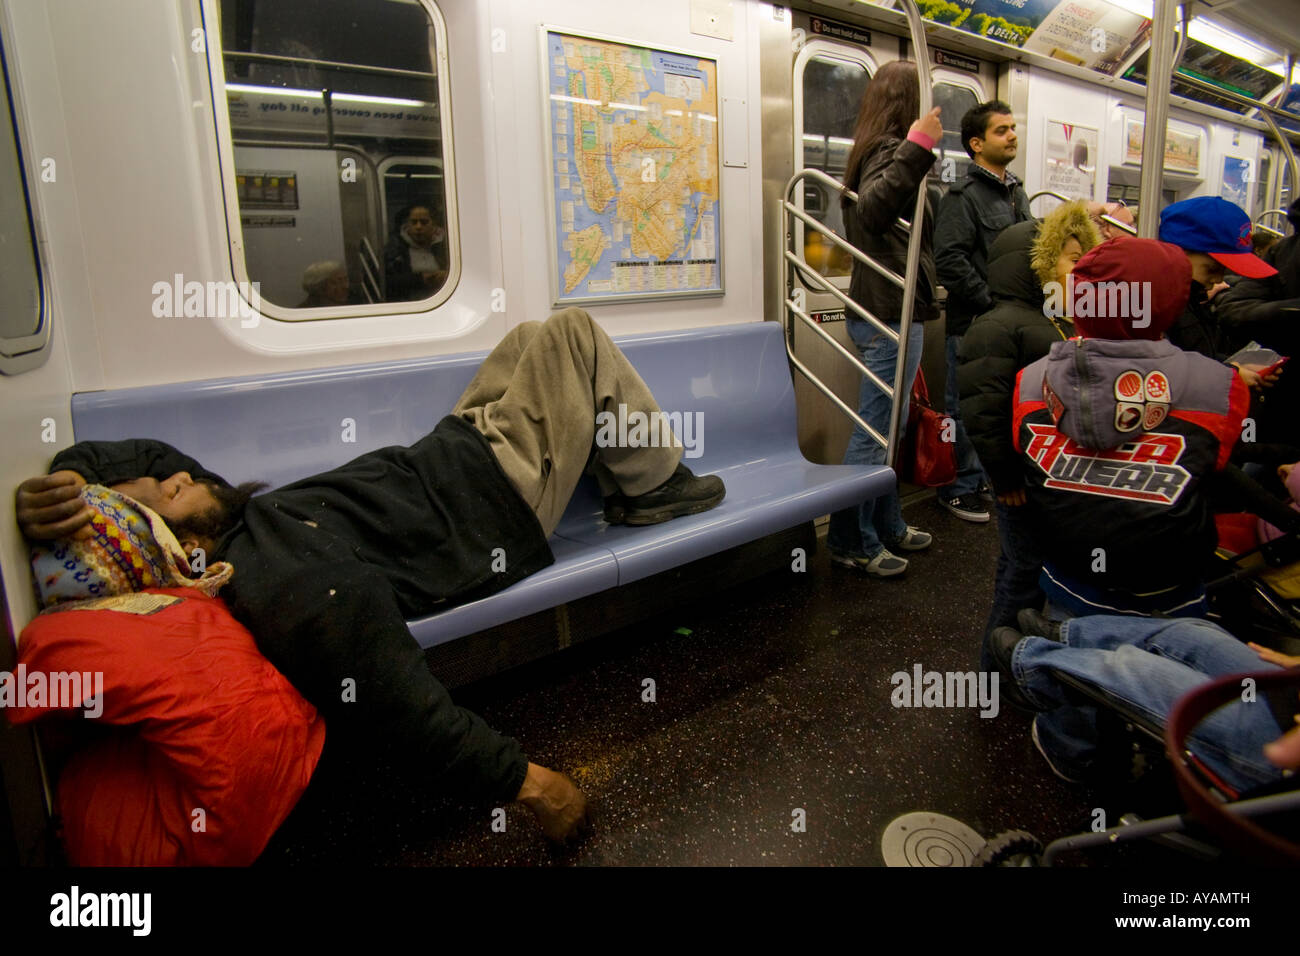 A homeless man sleeps on a subway seat in New York City Stock Photo